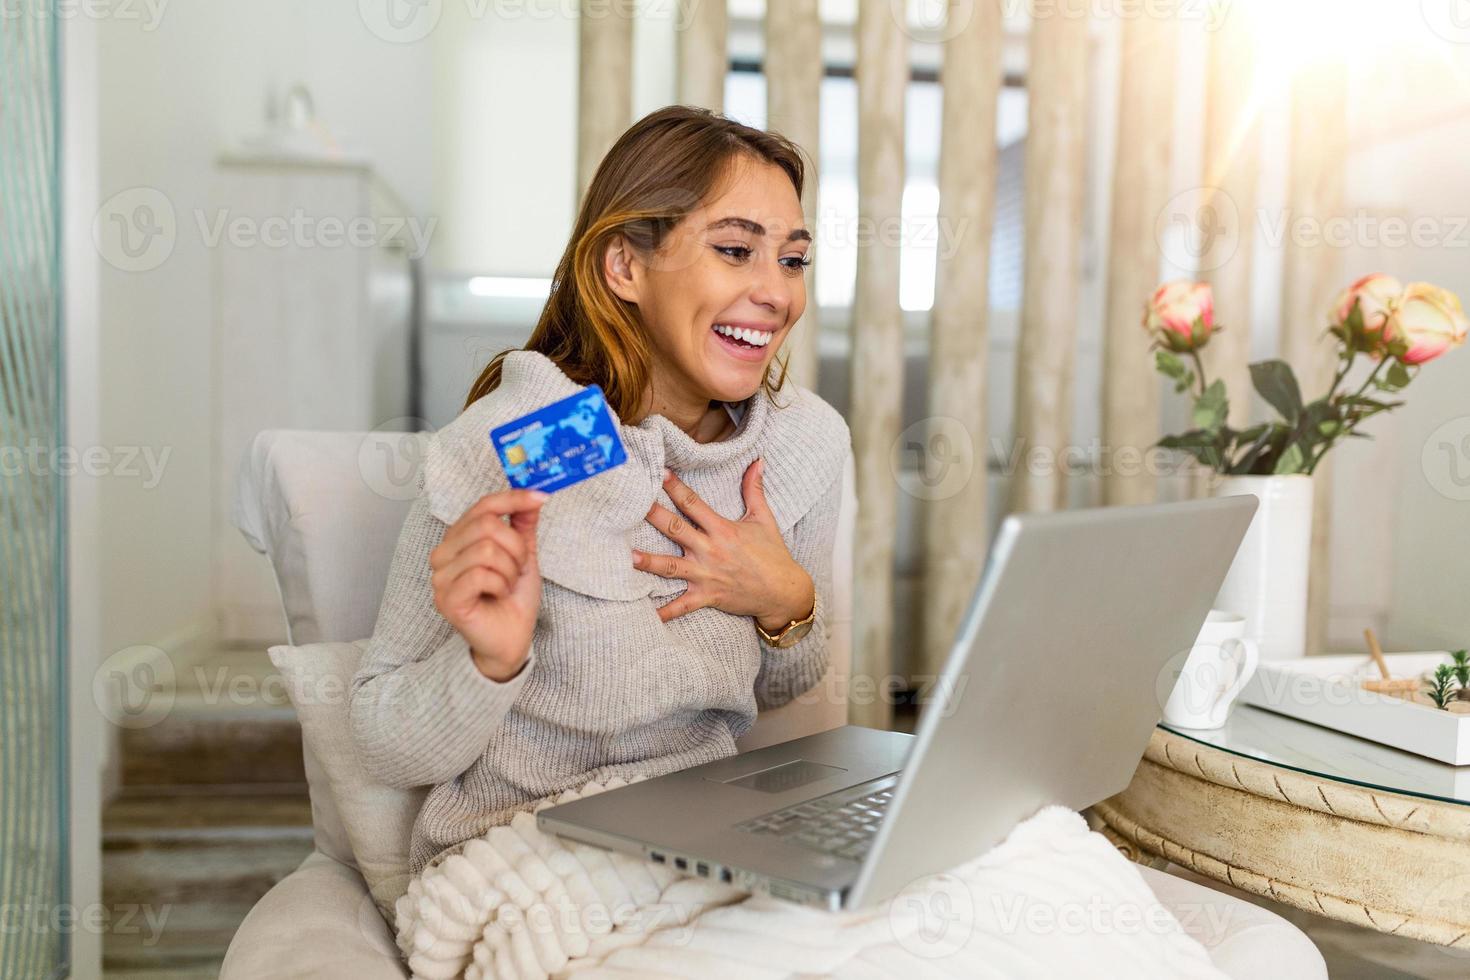 Pretty woman shopping online with credit card. woman holding credit card and using laptop. Online shopping concept of beautiful woman shopping from home photo